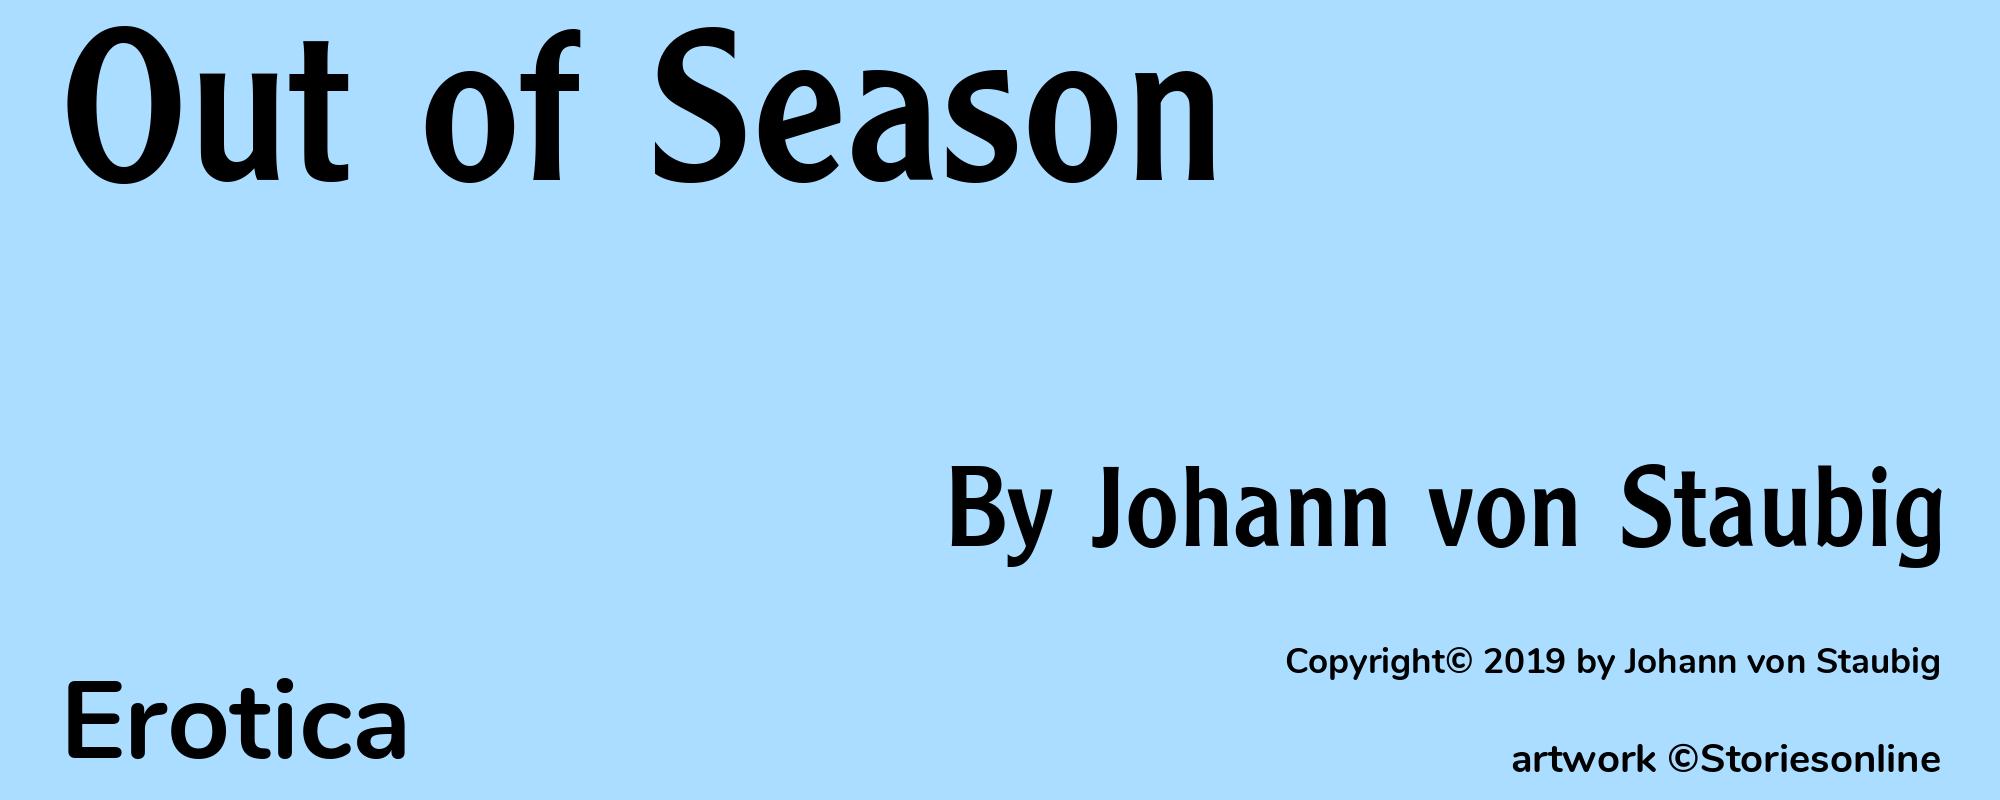 Out of Season - Cover